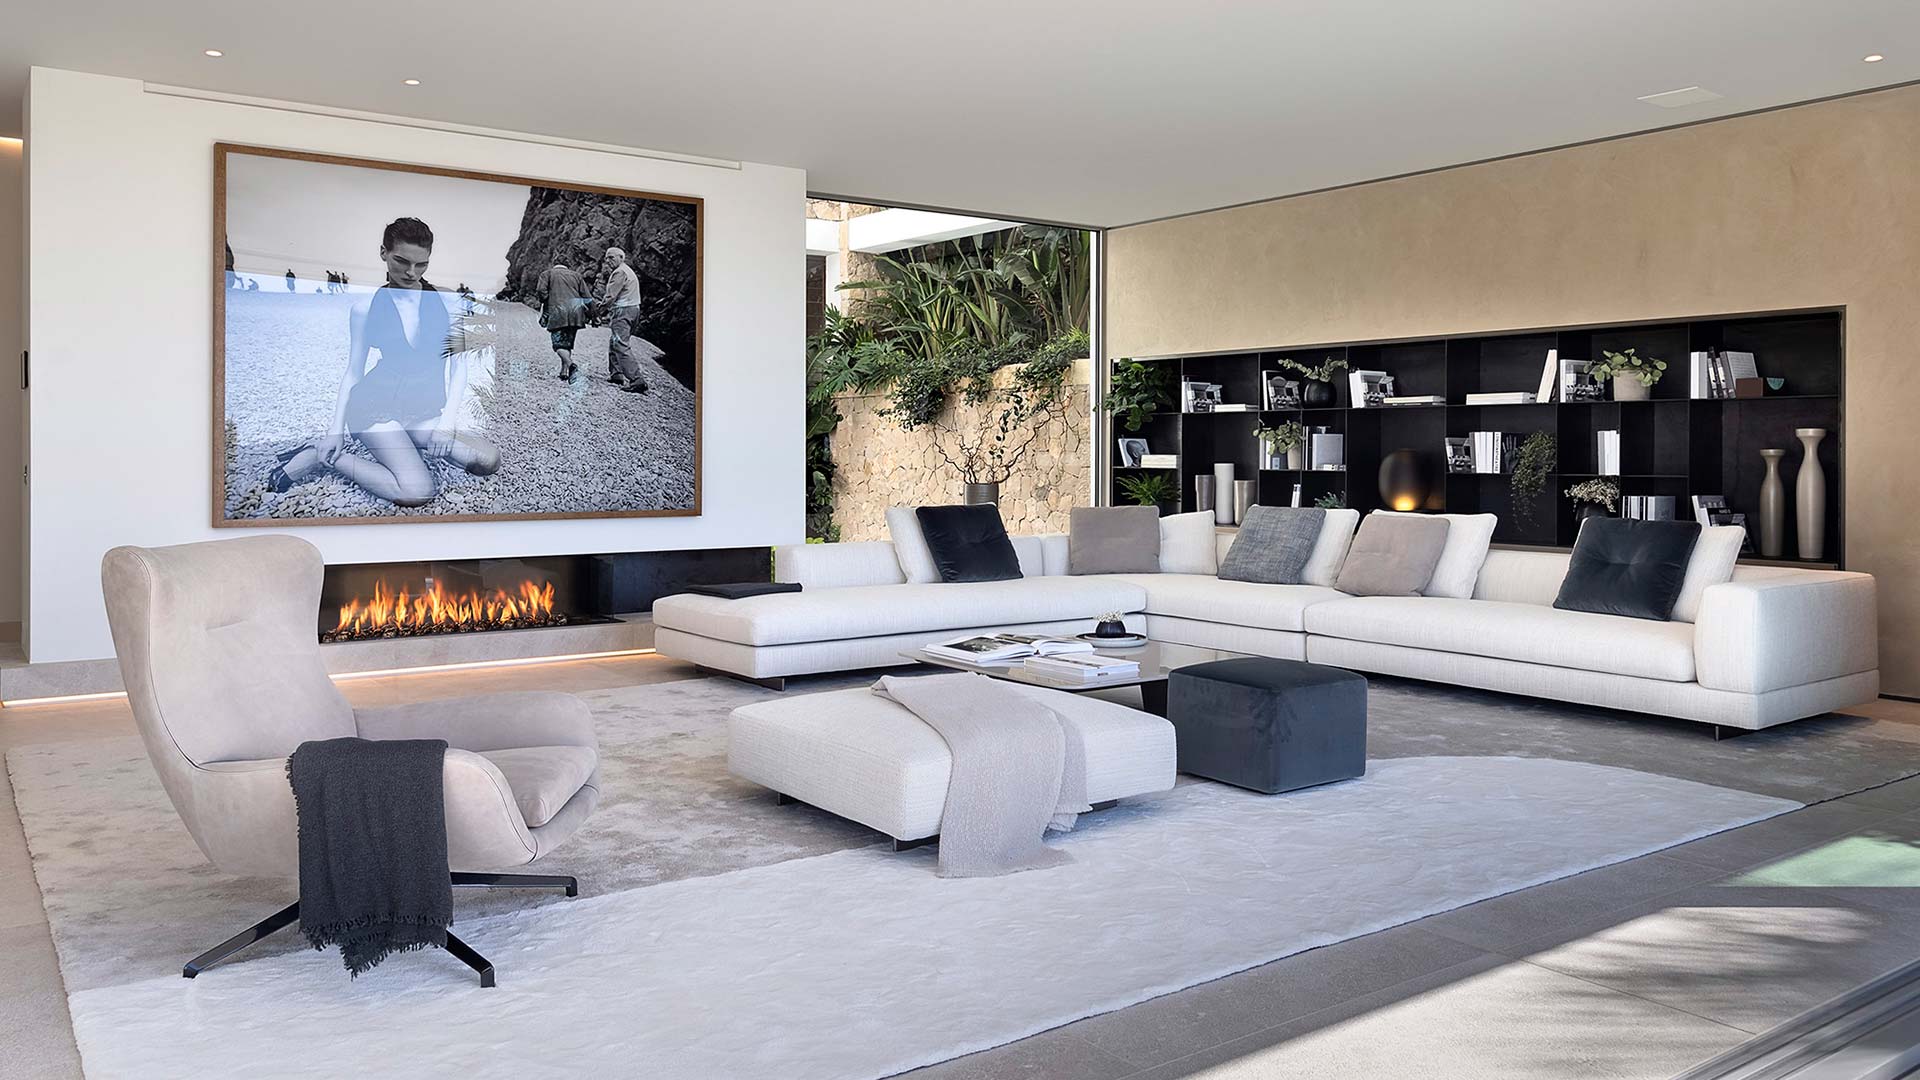 Living & Living Minotti Bedroom Minotti & Bedroom – - Cannes Cannes